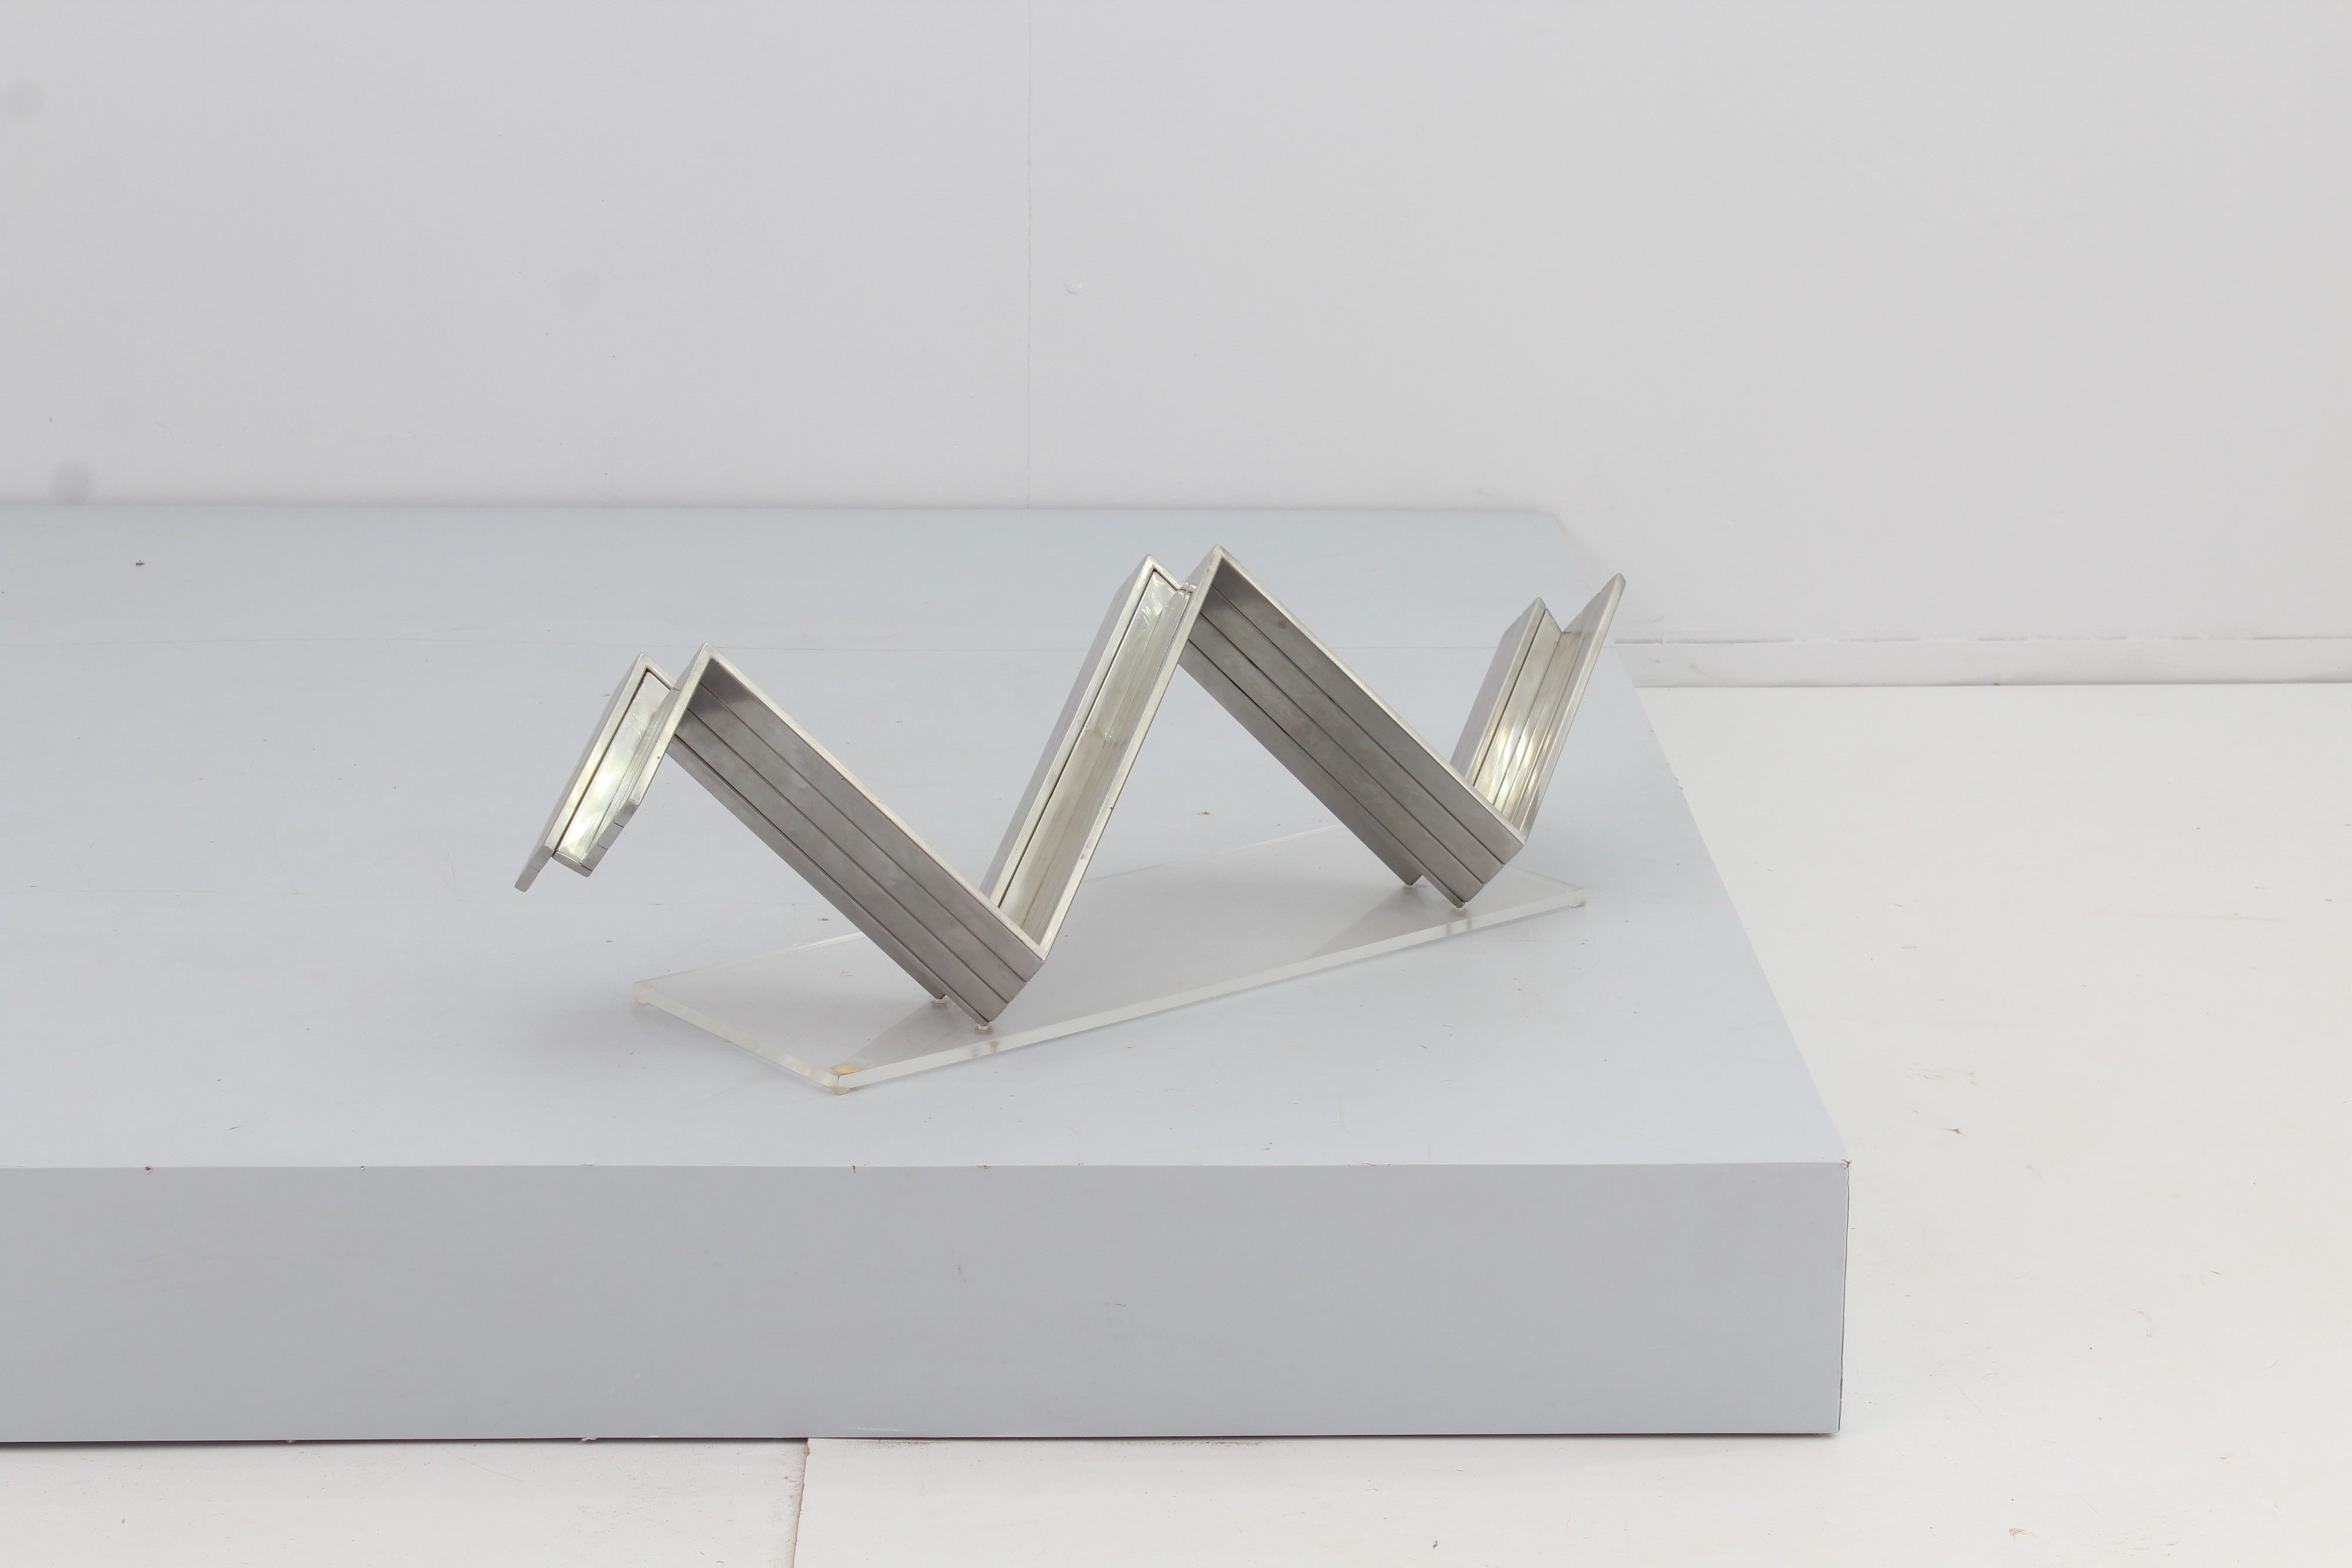 Salvatore Messina : Sculpture 'Tensioni orizzontali'  - Auction Top Design - LTWID Auction House